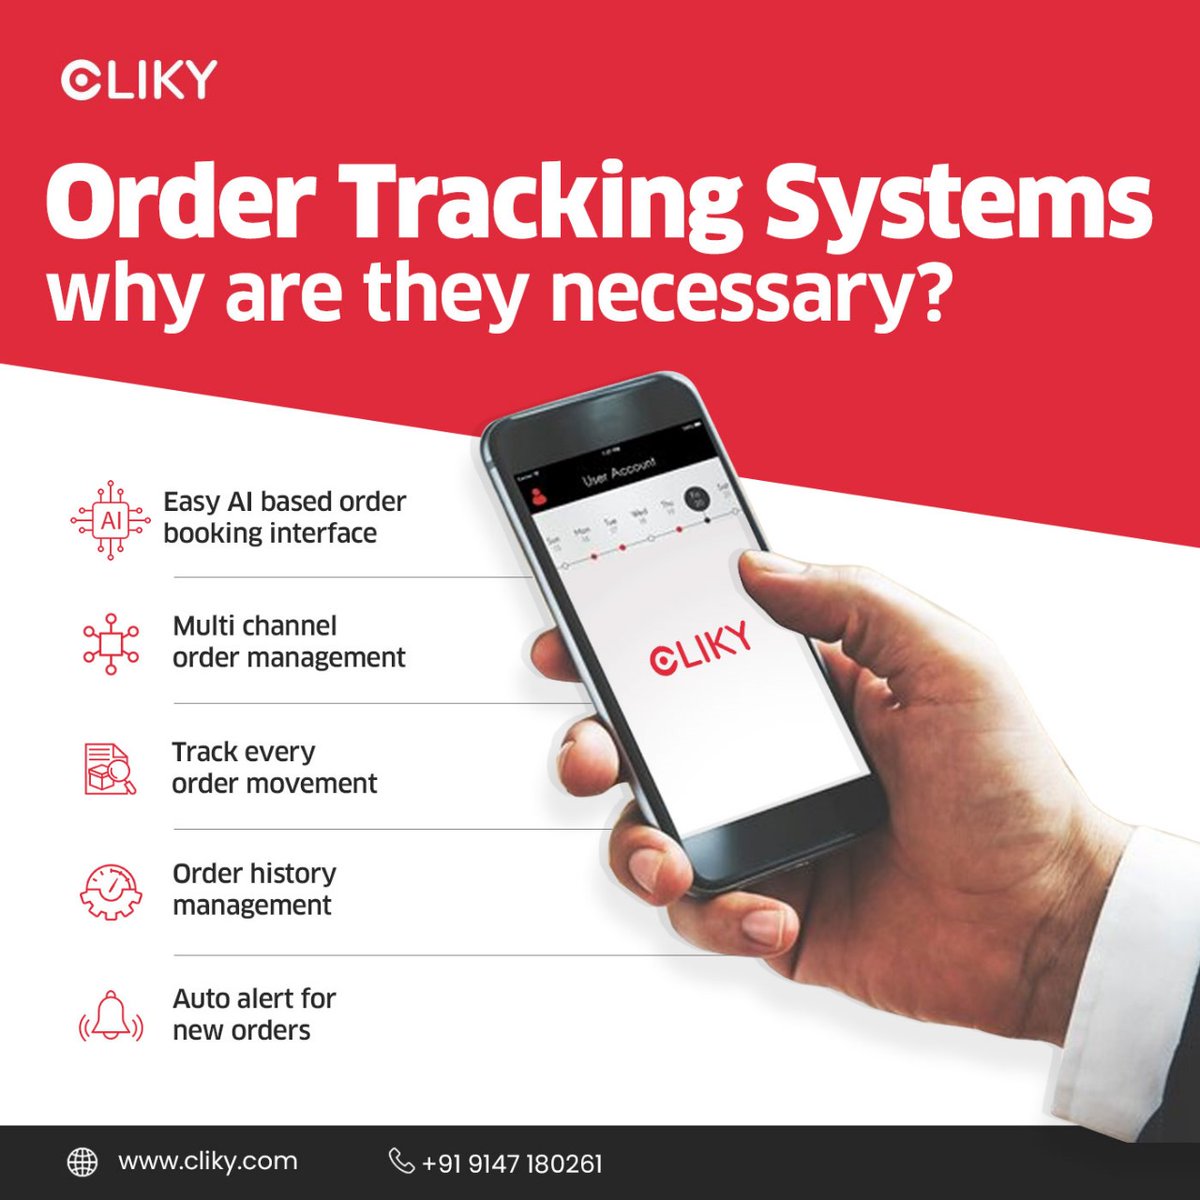 Managing your network of dealers, partners, distributors, and influencers just got easier. 
Visit: cliky.com or call us at: +91 9147 180261
#PartnerManagement #AI #GrowWithCLIKY #AI #PerformanceMonitoring #BusinessSolutions #Innovation #SmartTechnology #Cliky